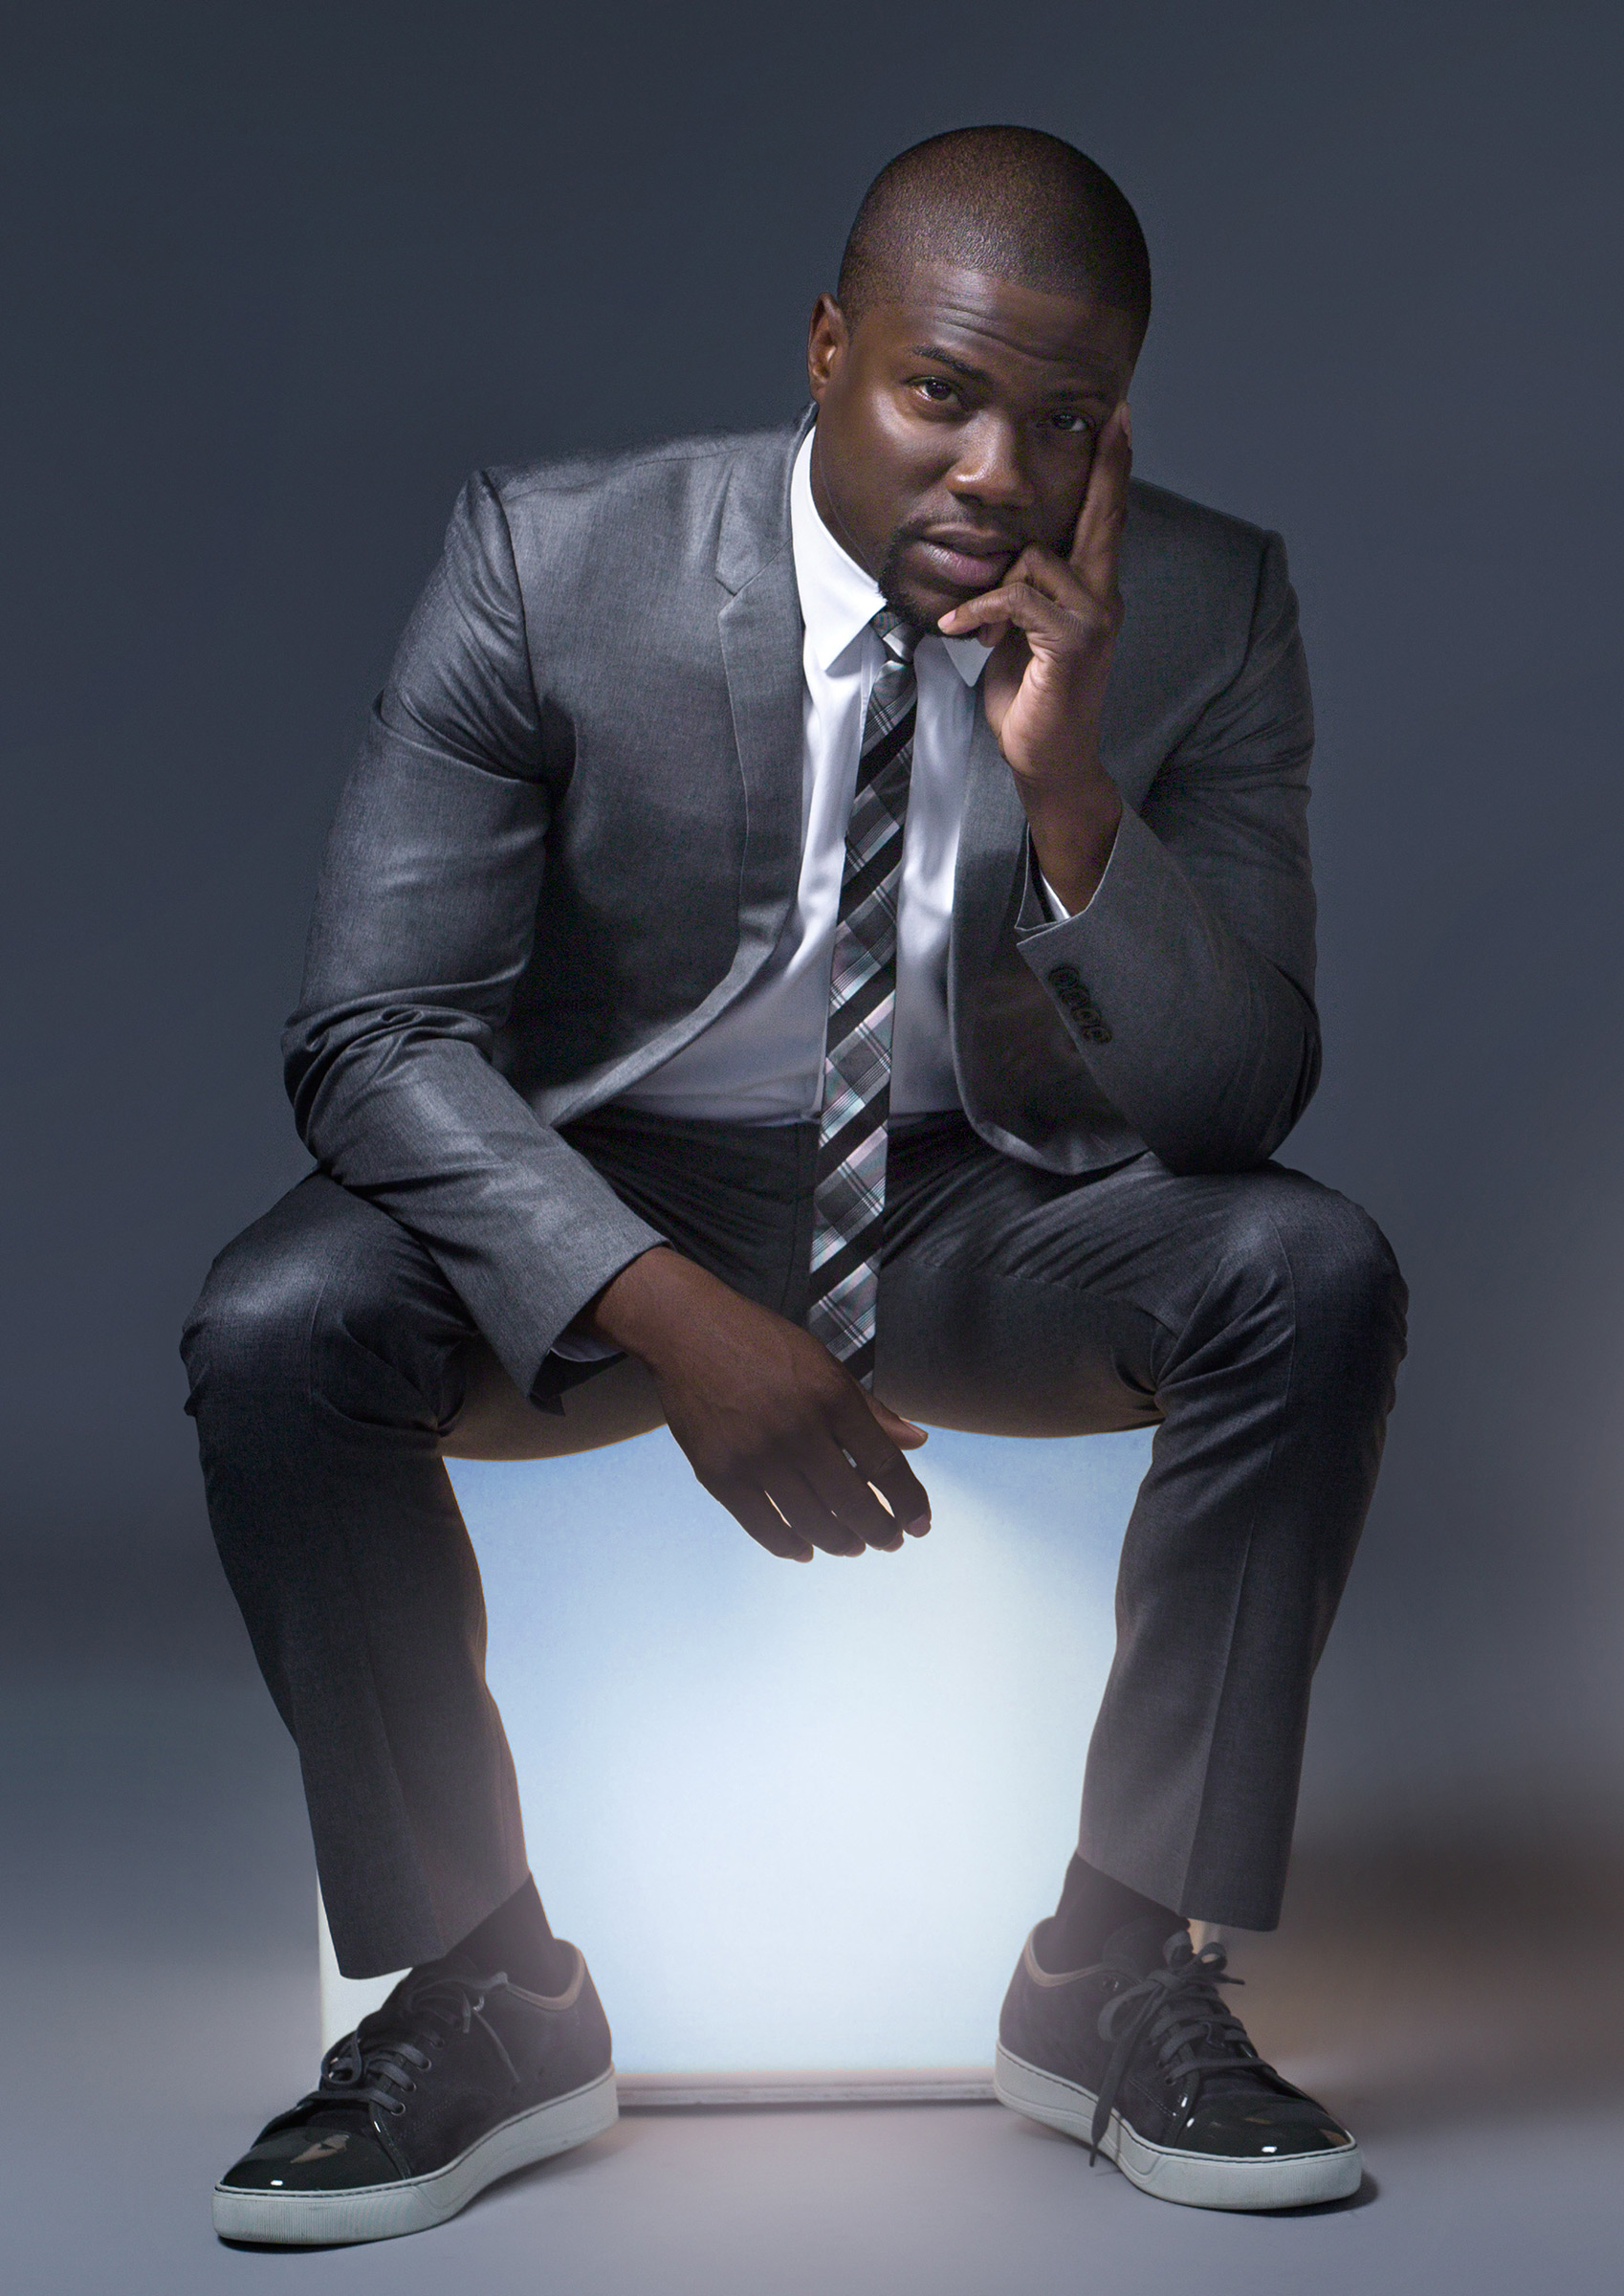 Kevin Hart Portrait for WMB 3D Magazine by Slickforce Studio Photographer Christian Arias